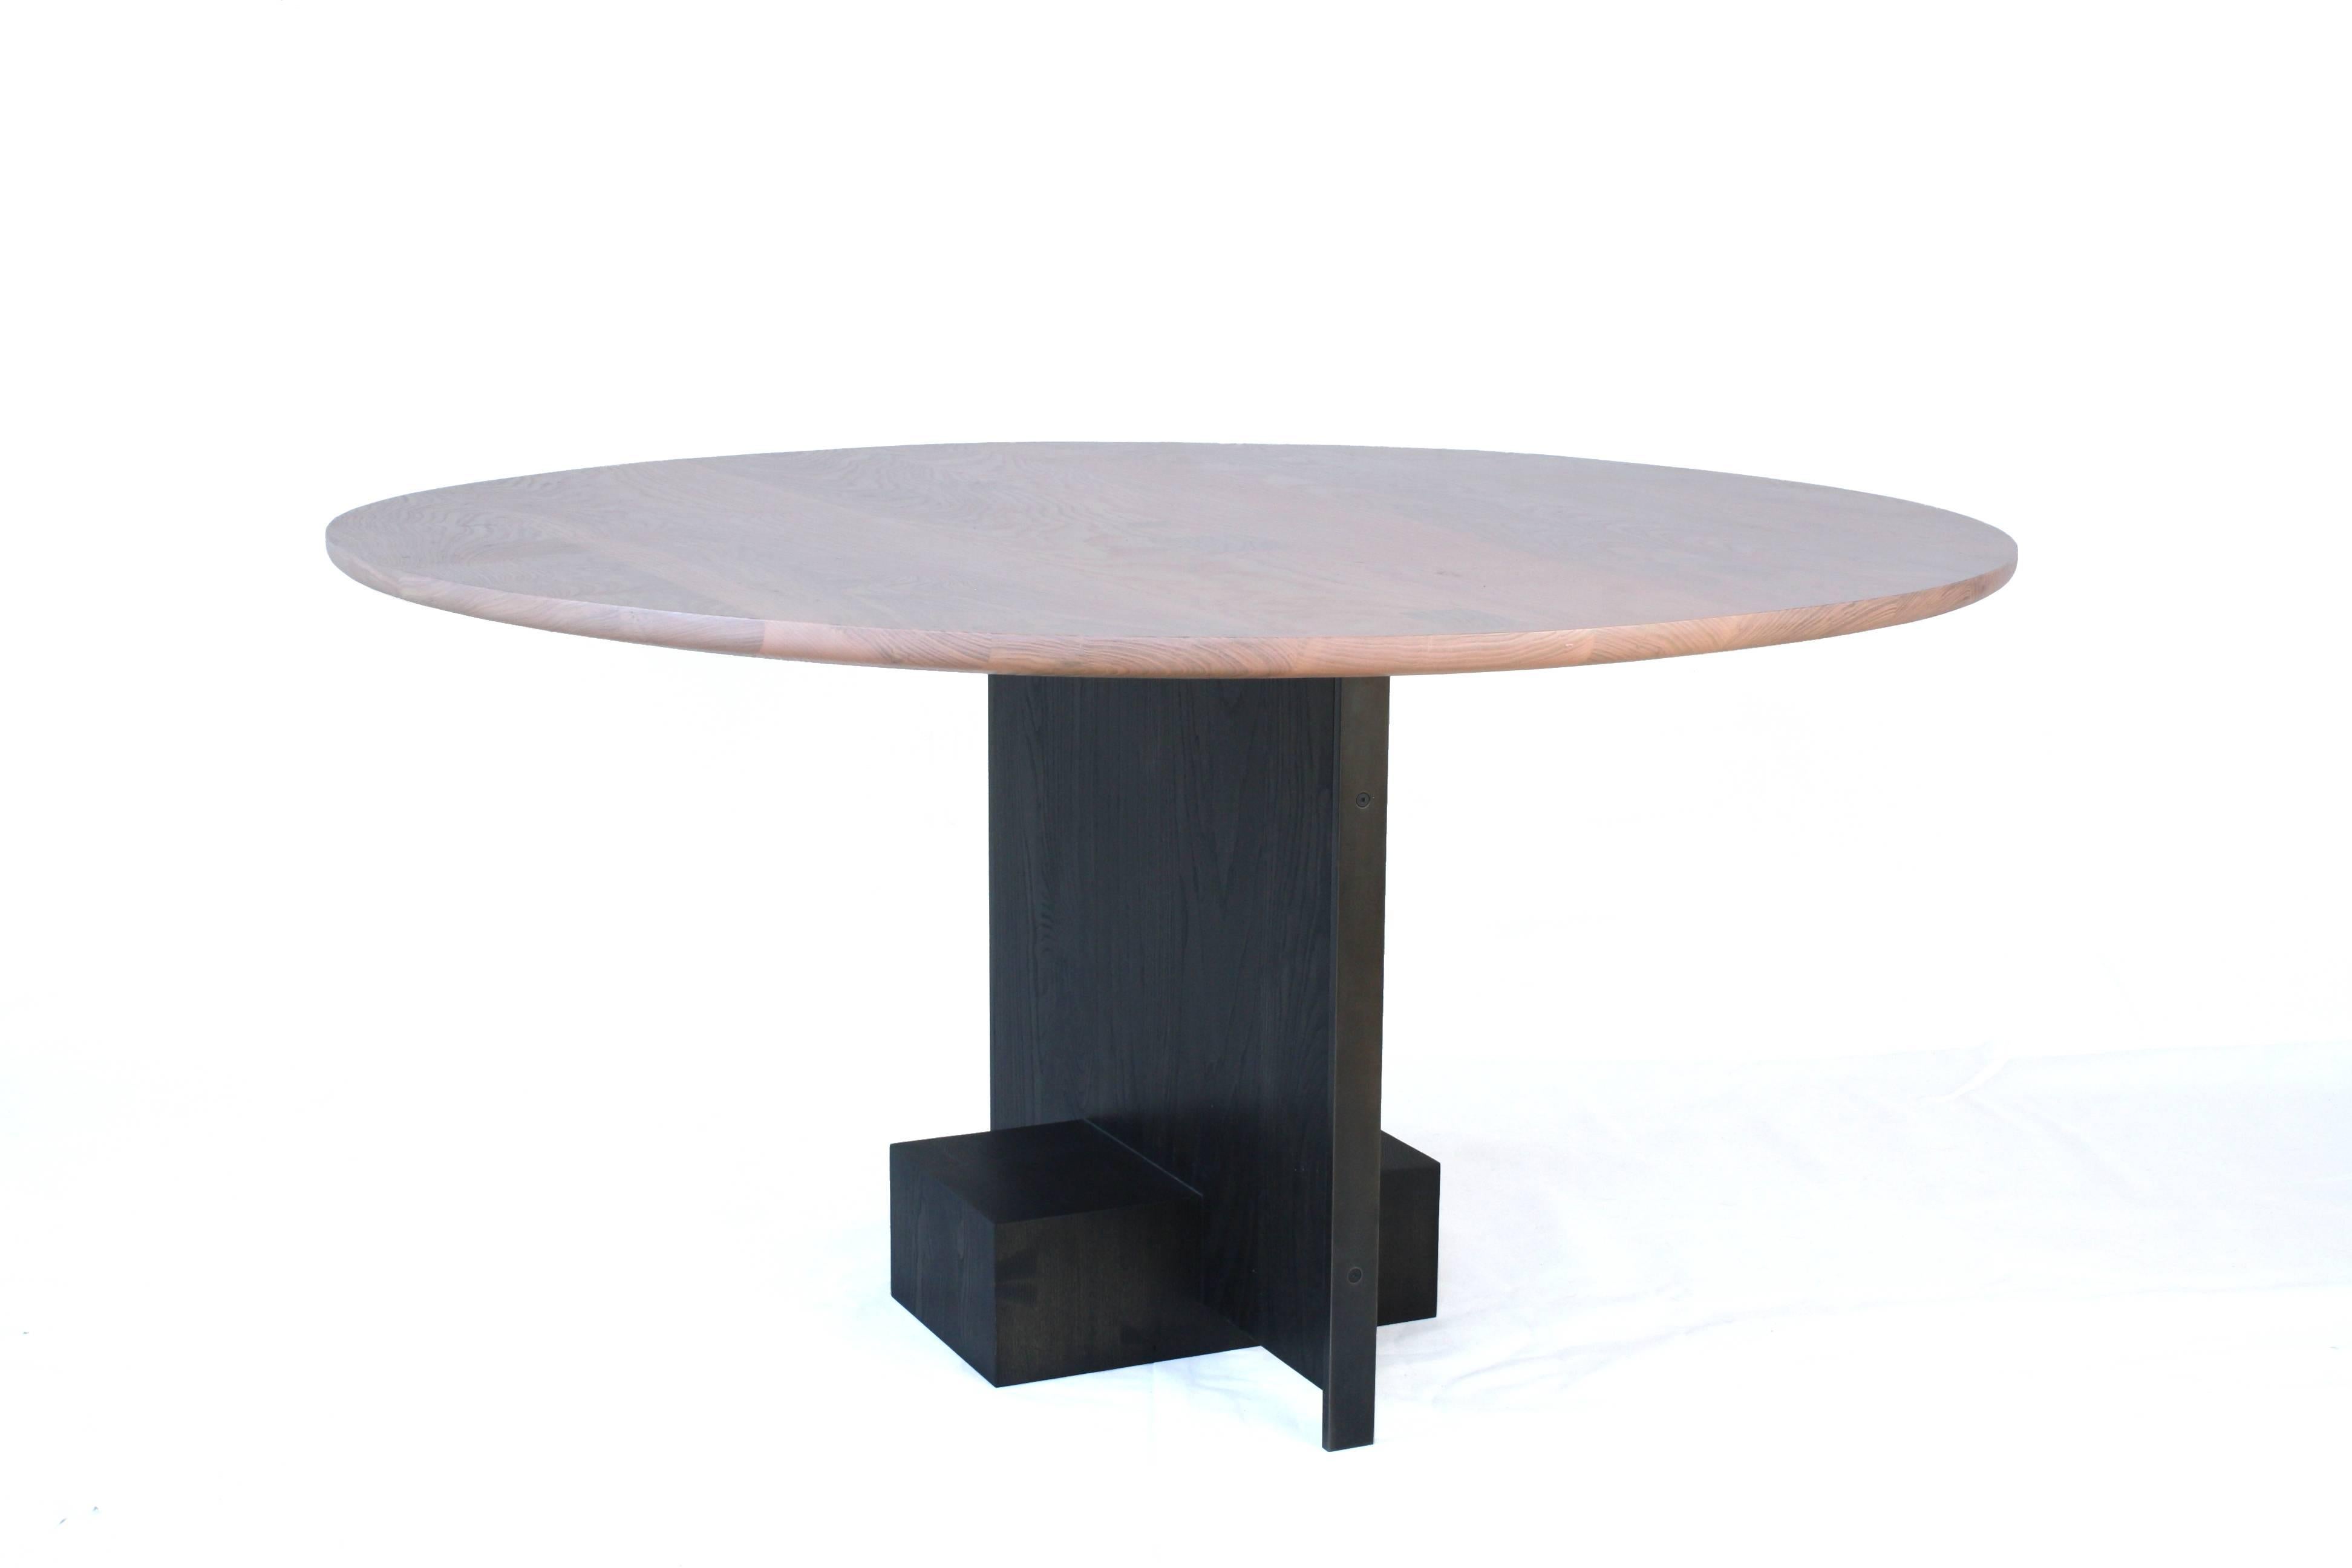 Handmade in Chicago by Laylo Studio, this dining table can be customized for any space.

Set into a solid wood end grain block, the panel leg of this table floats above the ground with the aid of a thick blackened steel bar running from the floor to